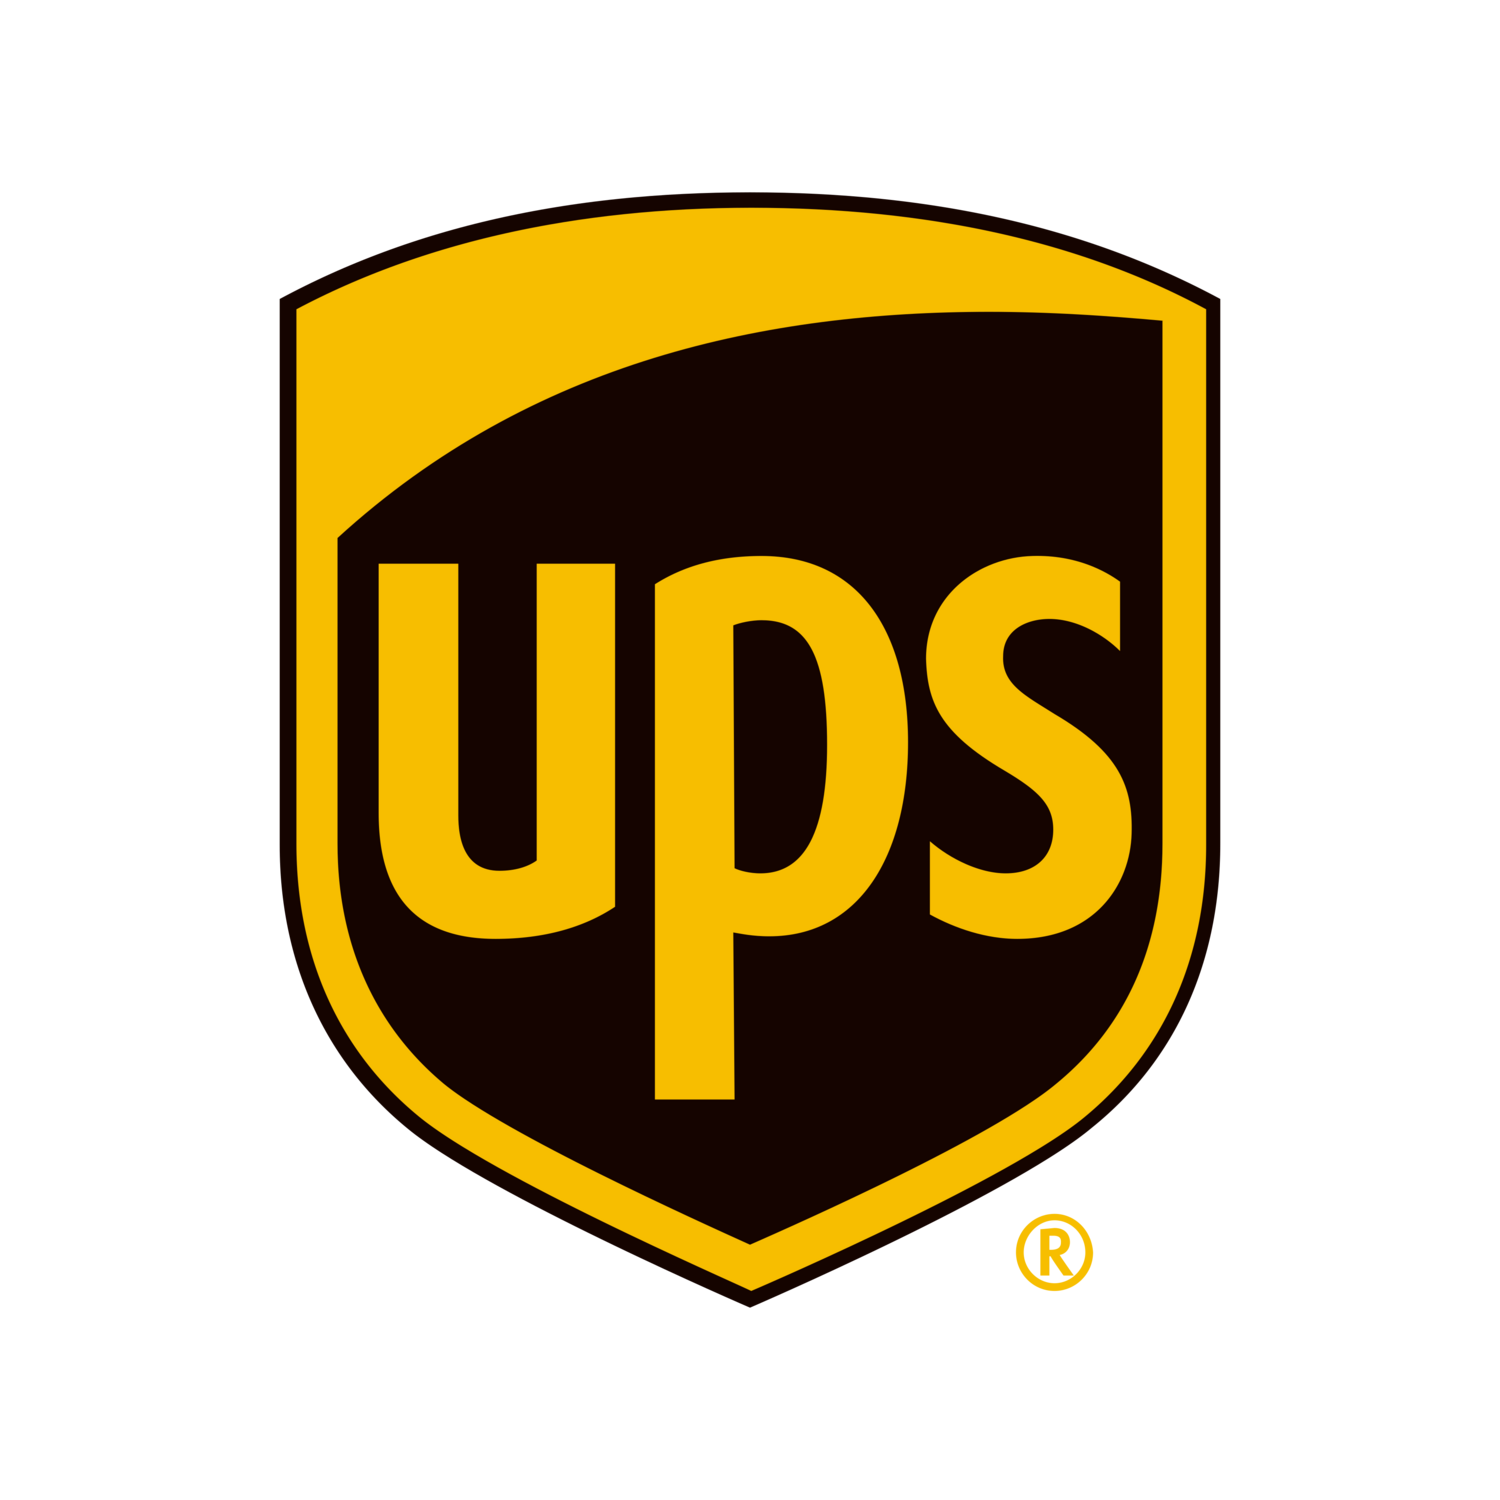 Upgrade UPS Standard Shipping to 3 Day Select